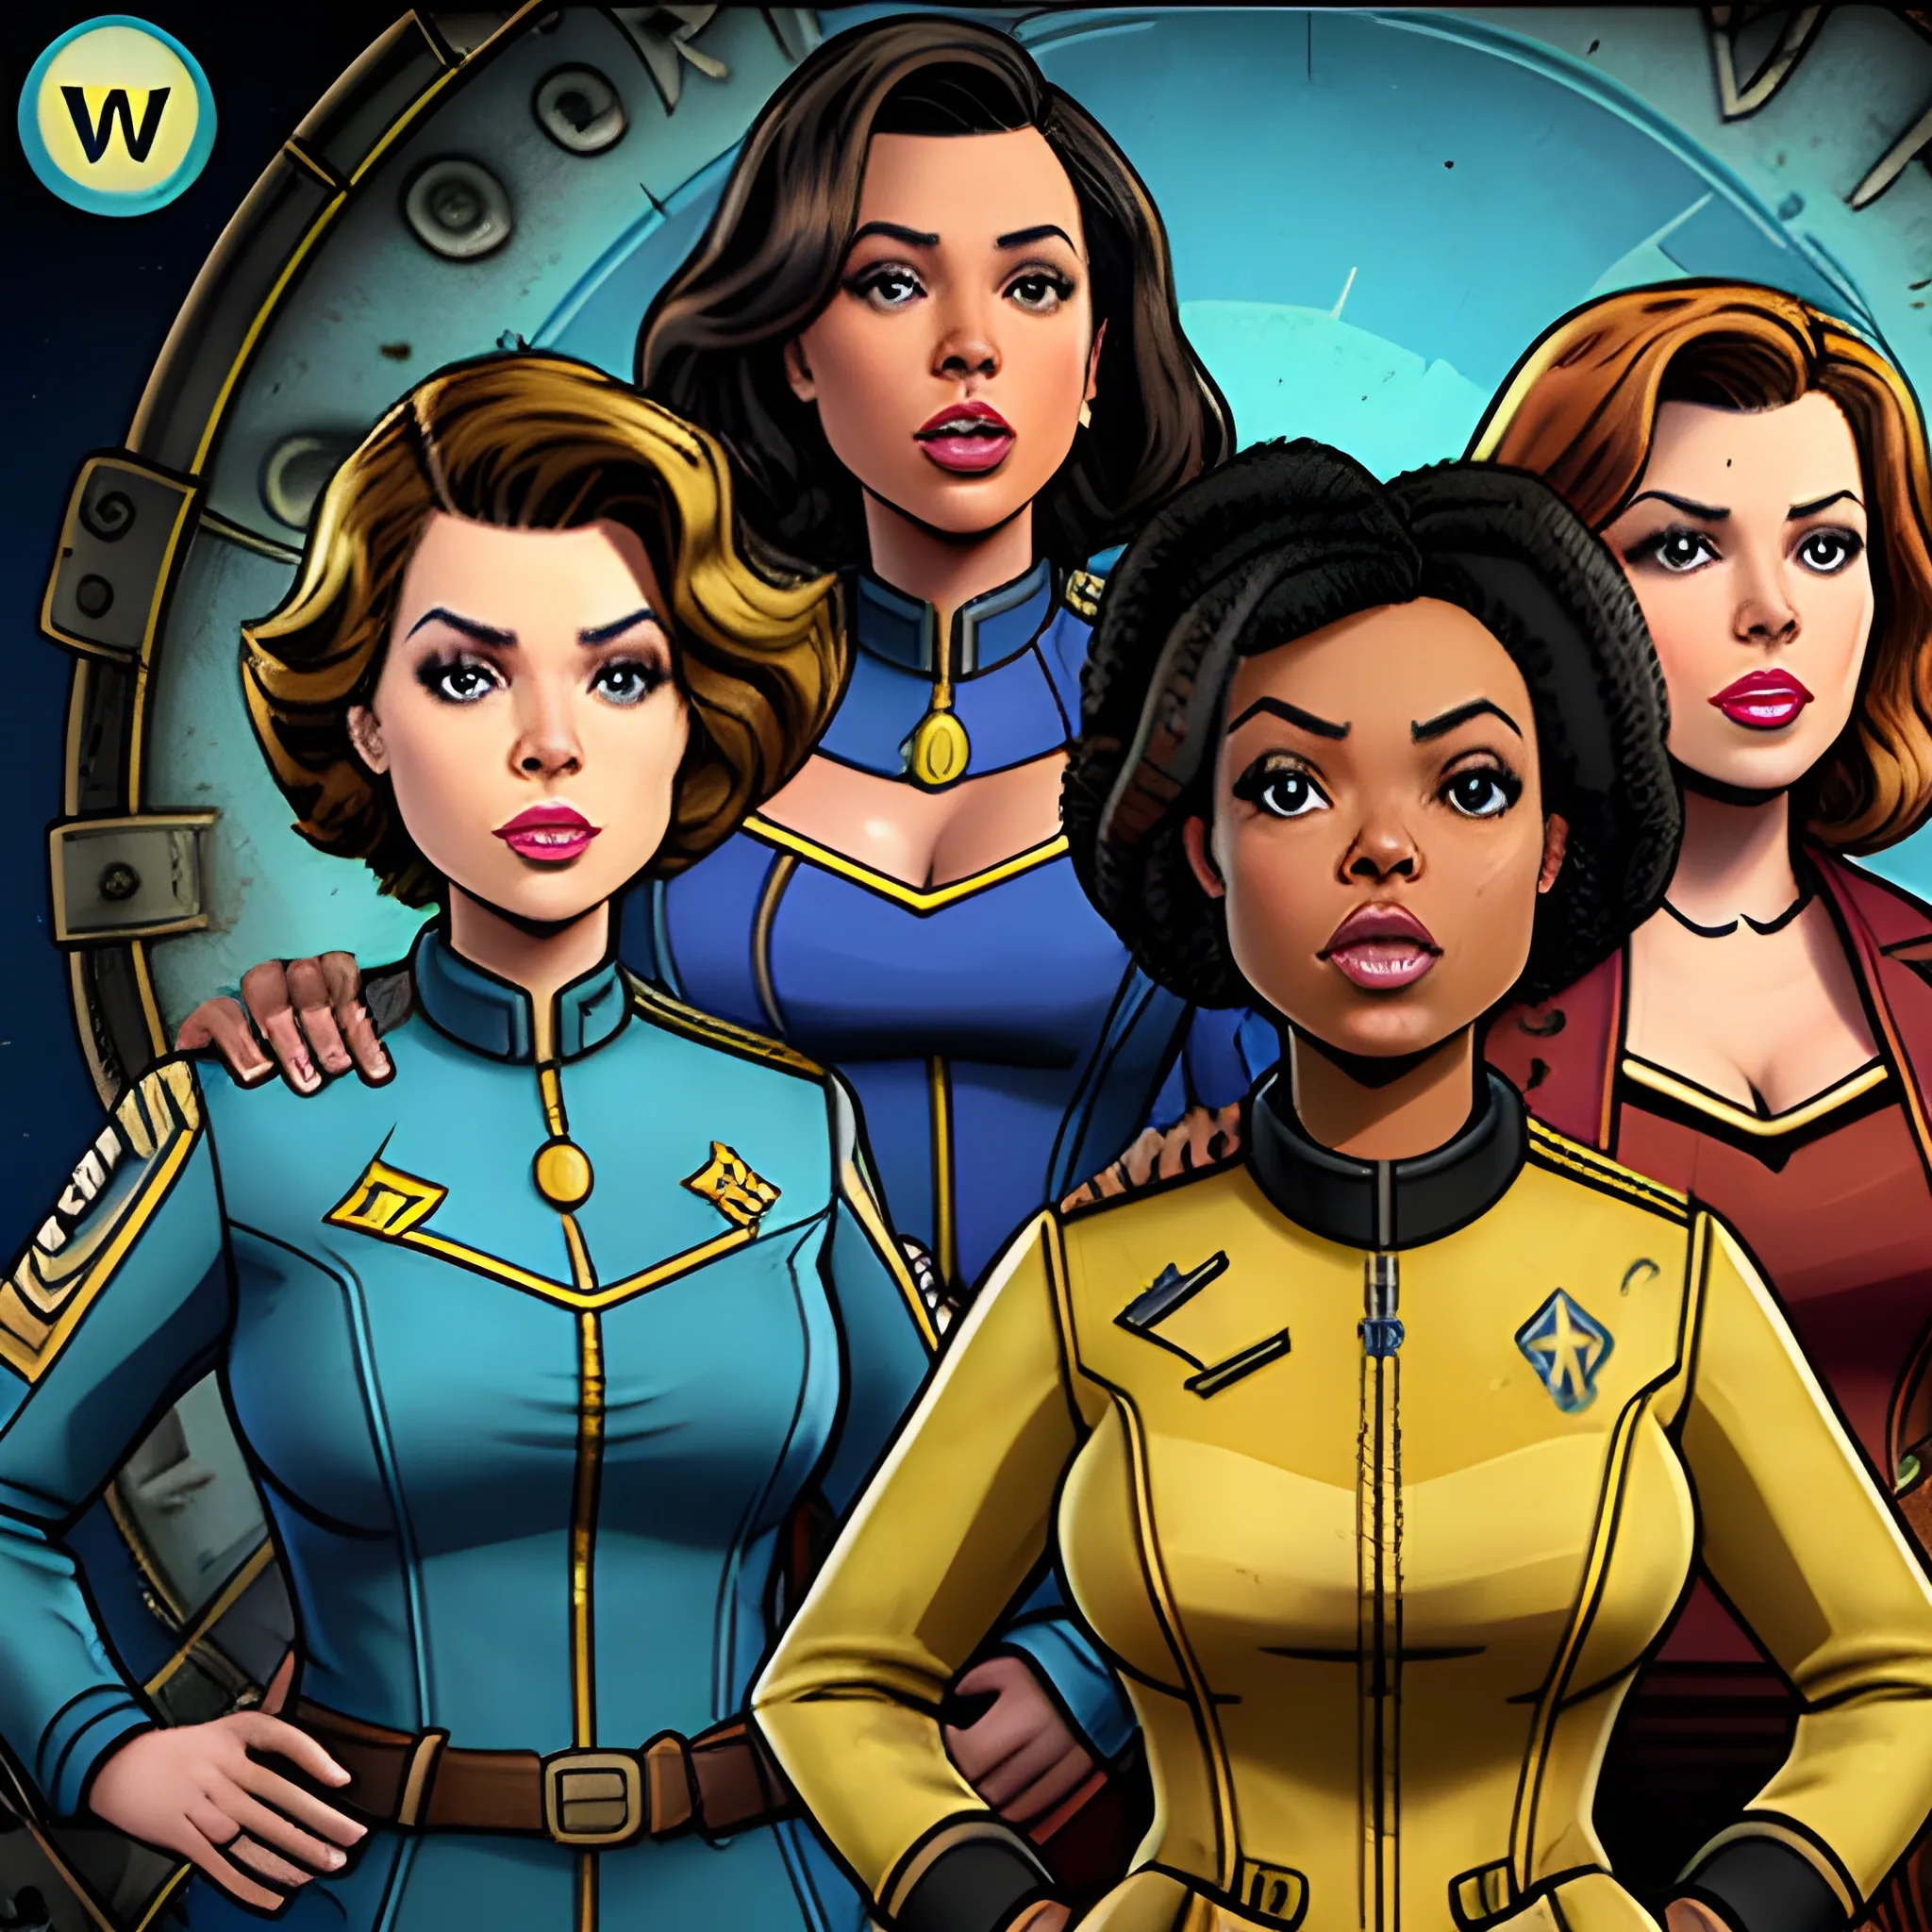 In the style of Fallout New Vegas, masterpiece, group of( Yvette Nicole Brown and Allison Brie and and Gillian Jacobs) as vault dwellers in blue vault suit